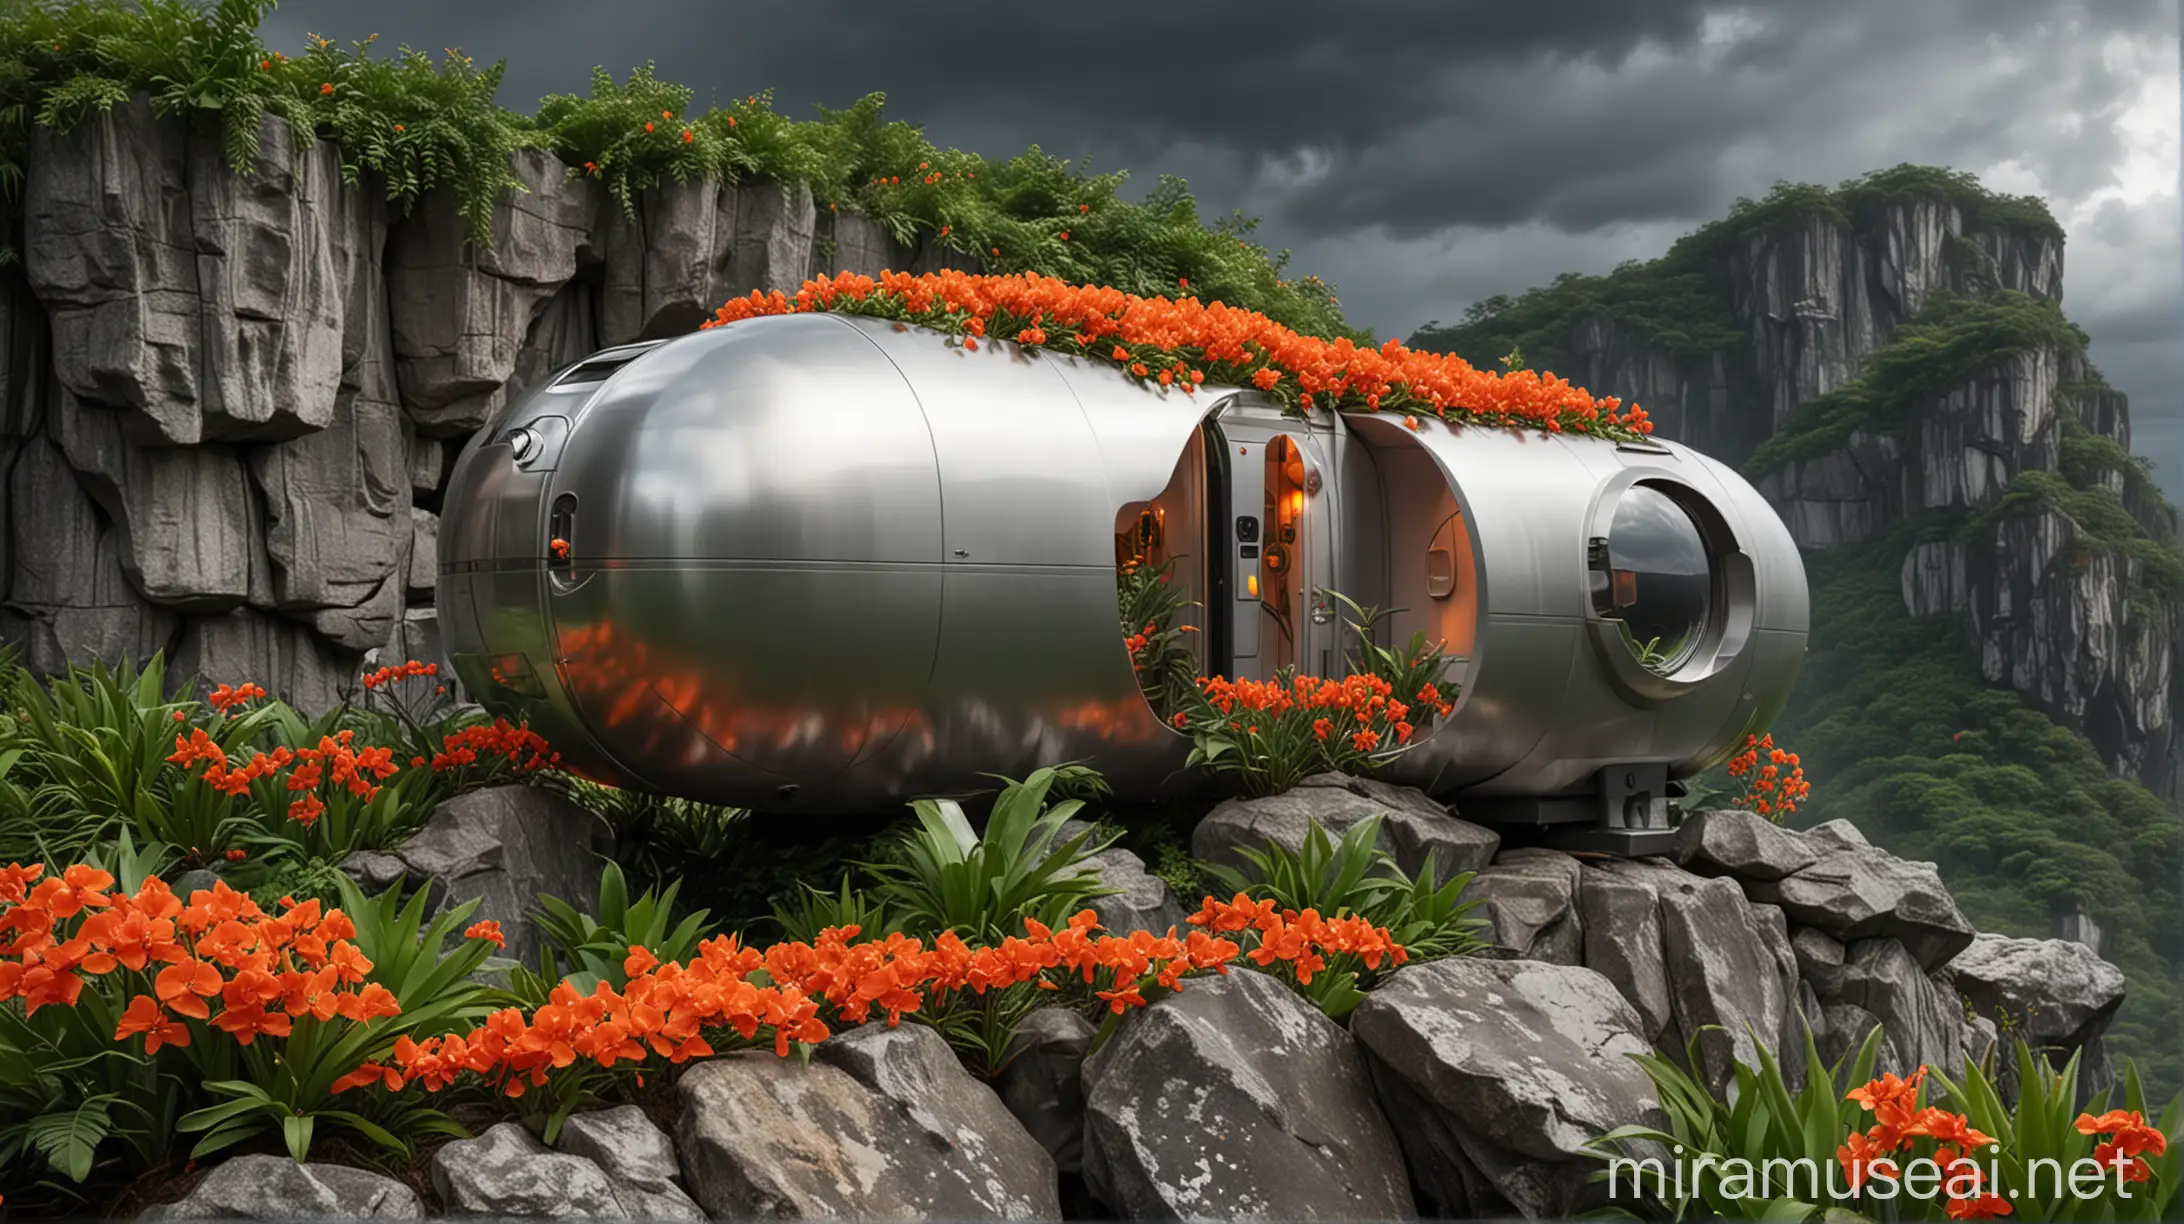 Futuristic Silver Capsule House on Rocky Outcrop Amidst Lush Foliage and Orchids